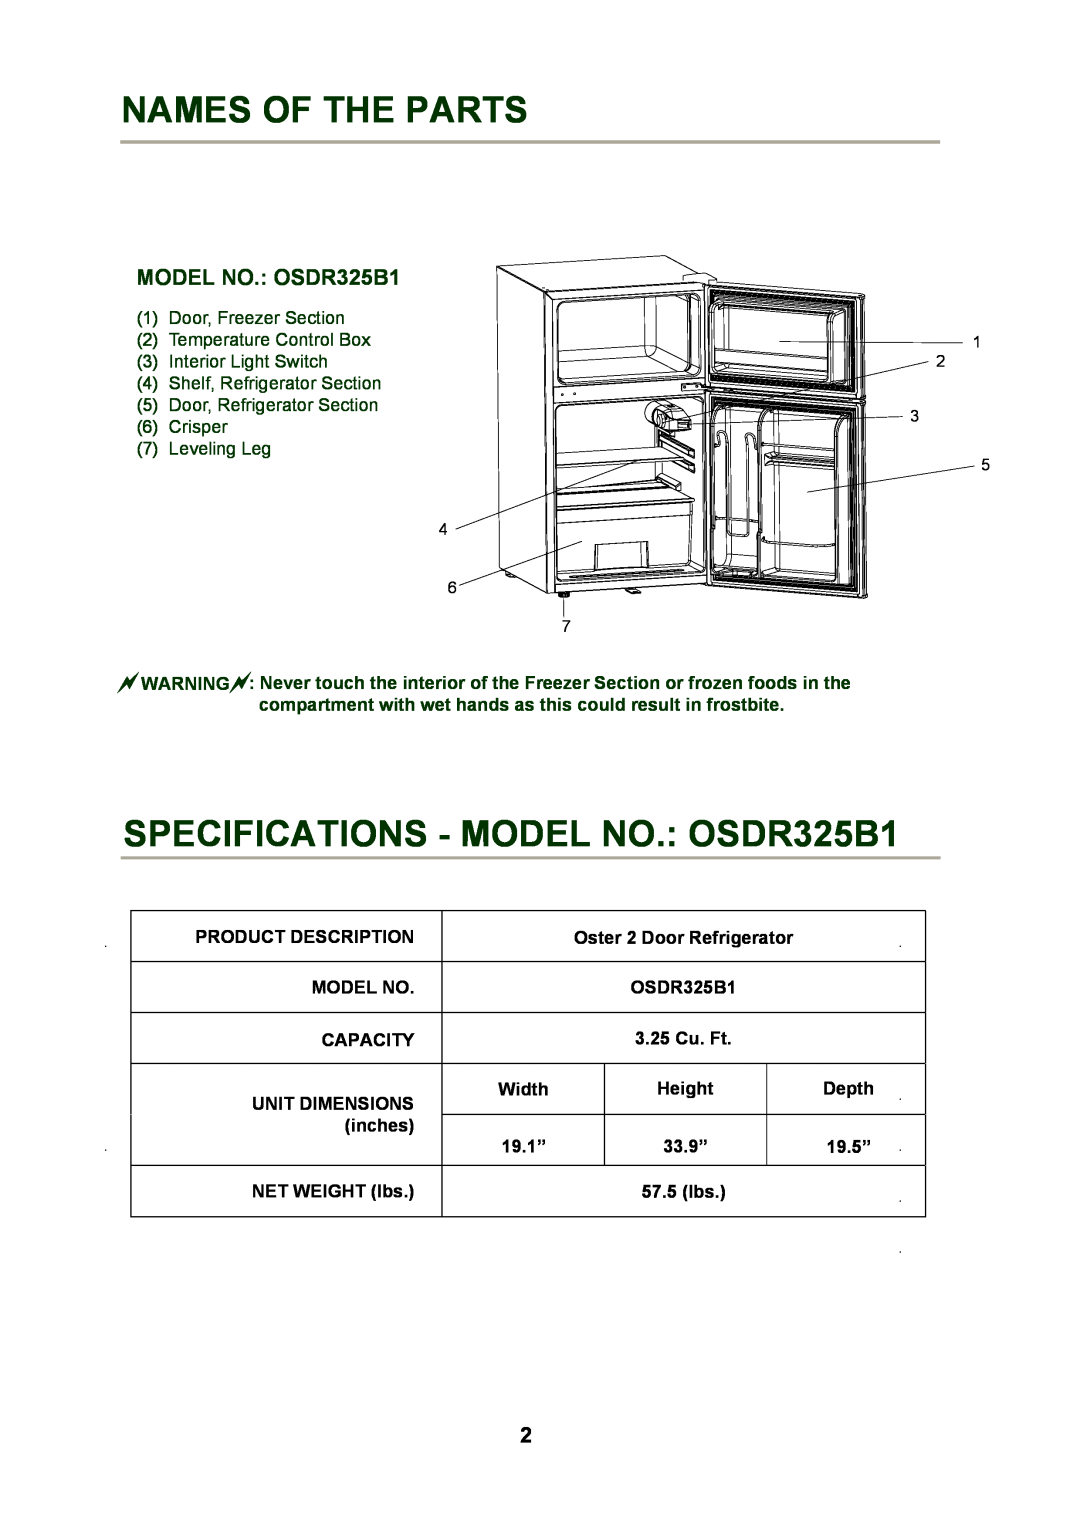 Oster Oster 3.25 CU. FT. Refrigerator instruction manual Names Of The Parts, SPECIFICATIONS - MODEL NO. OSDR325B1 